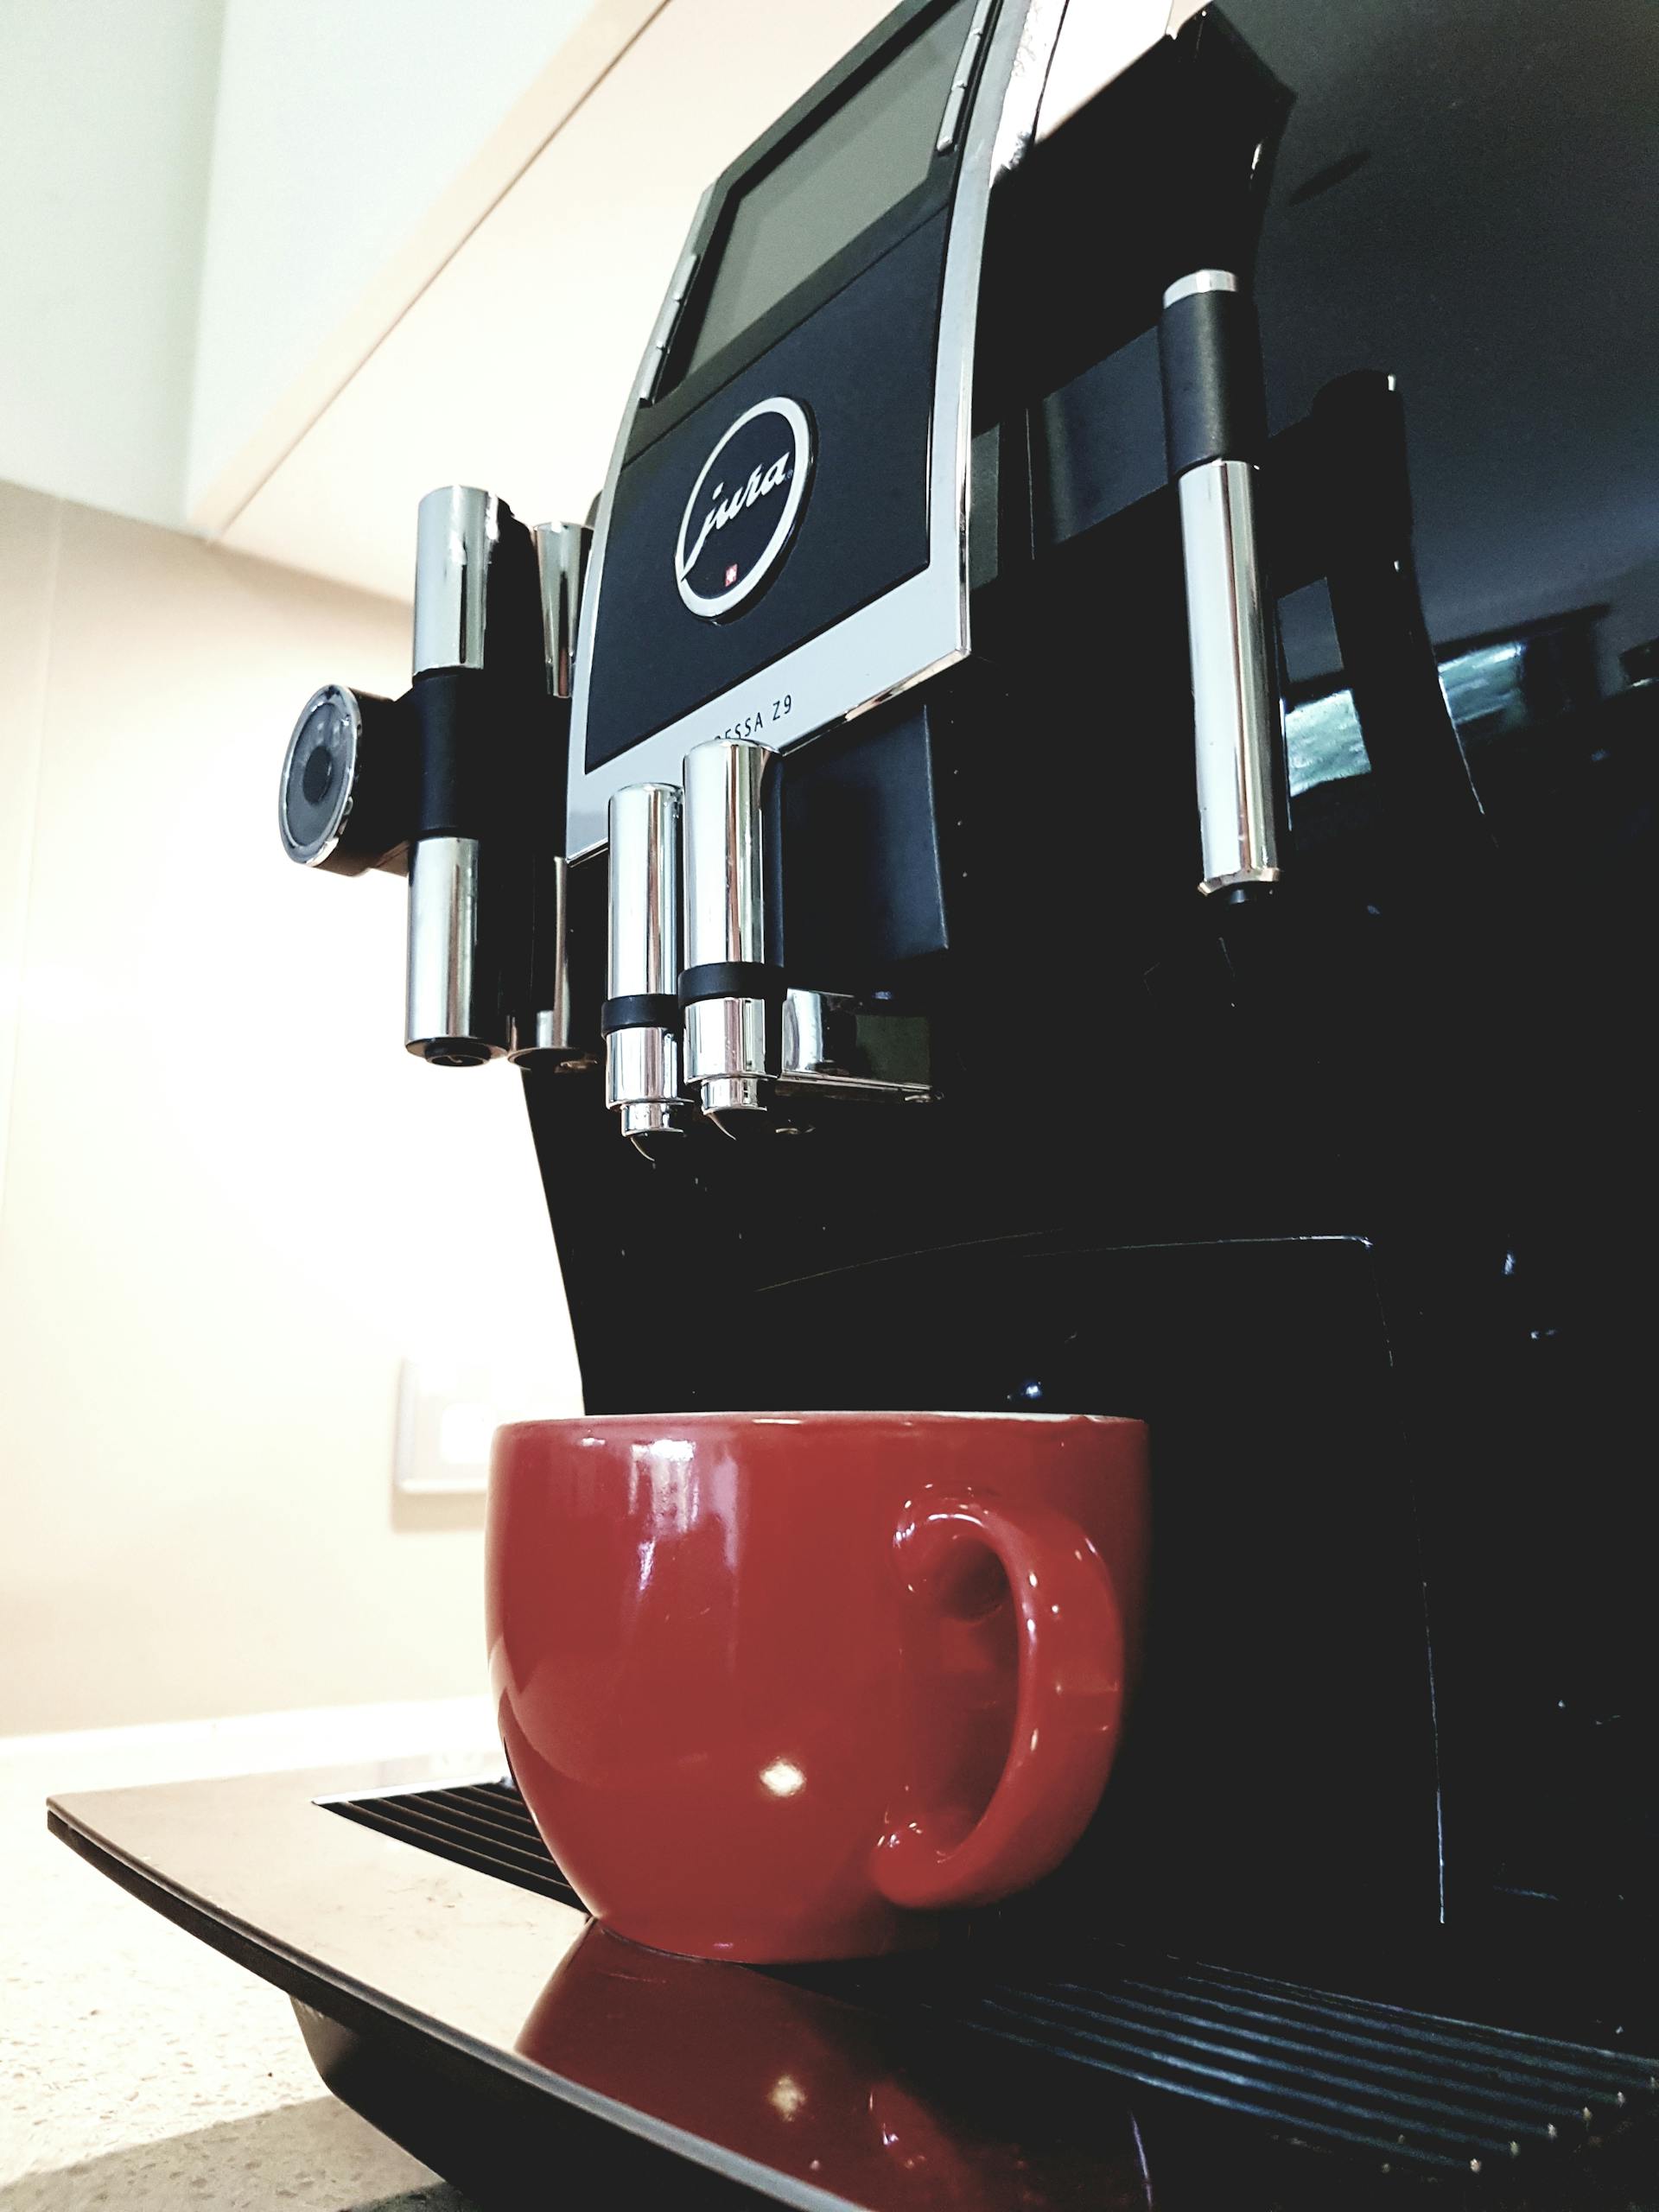 A coffee machine with a red cup | Source: Pexels